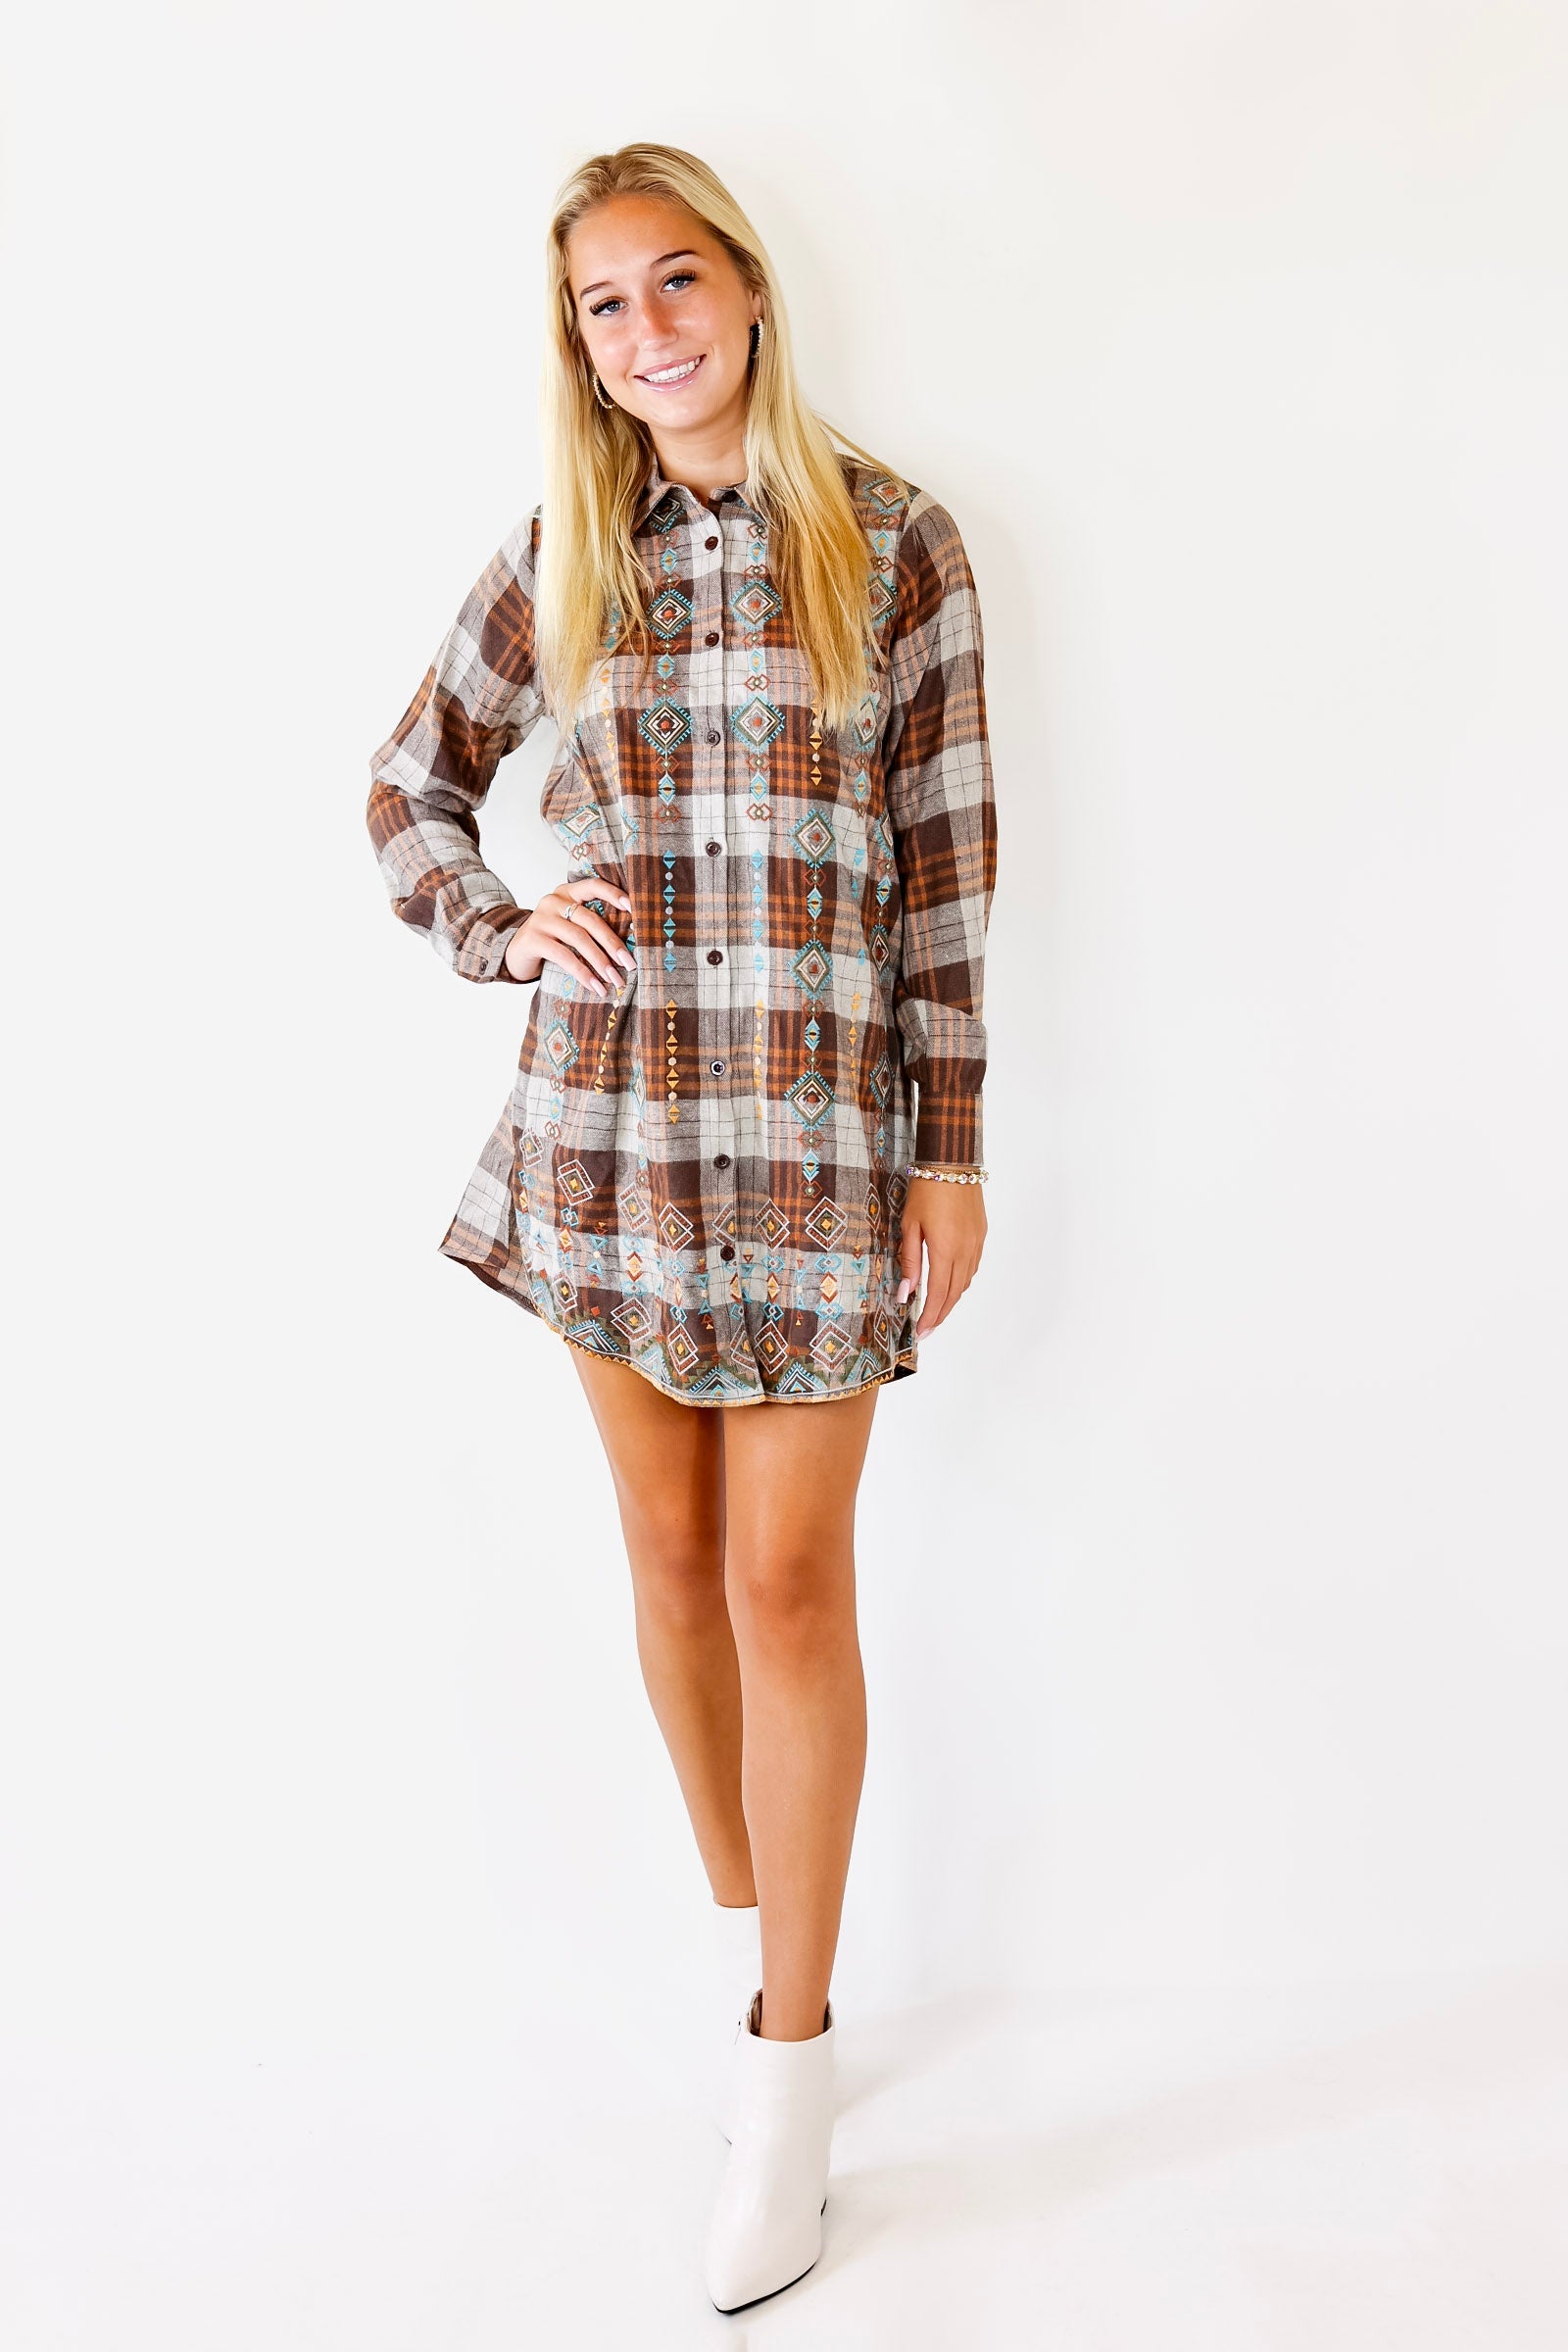 Loving In Layers Tribal Embroidered Plaid Button Up Dress in Brown Mix - Giddy Up Glamour Boutique